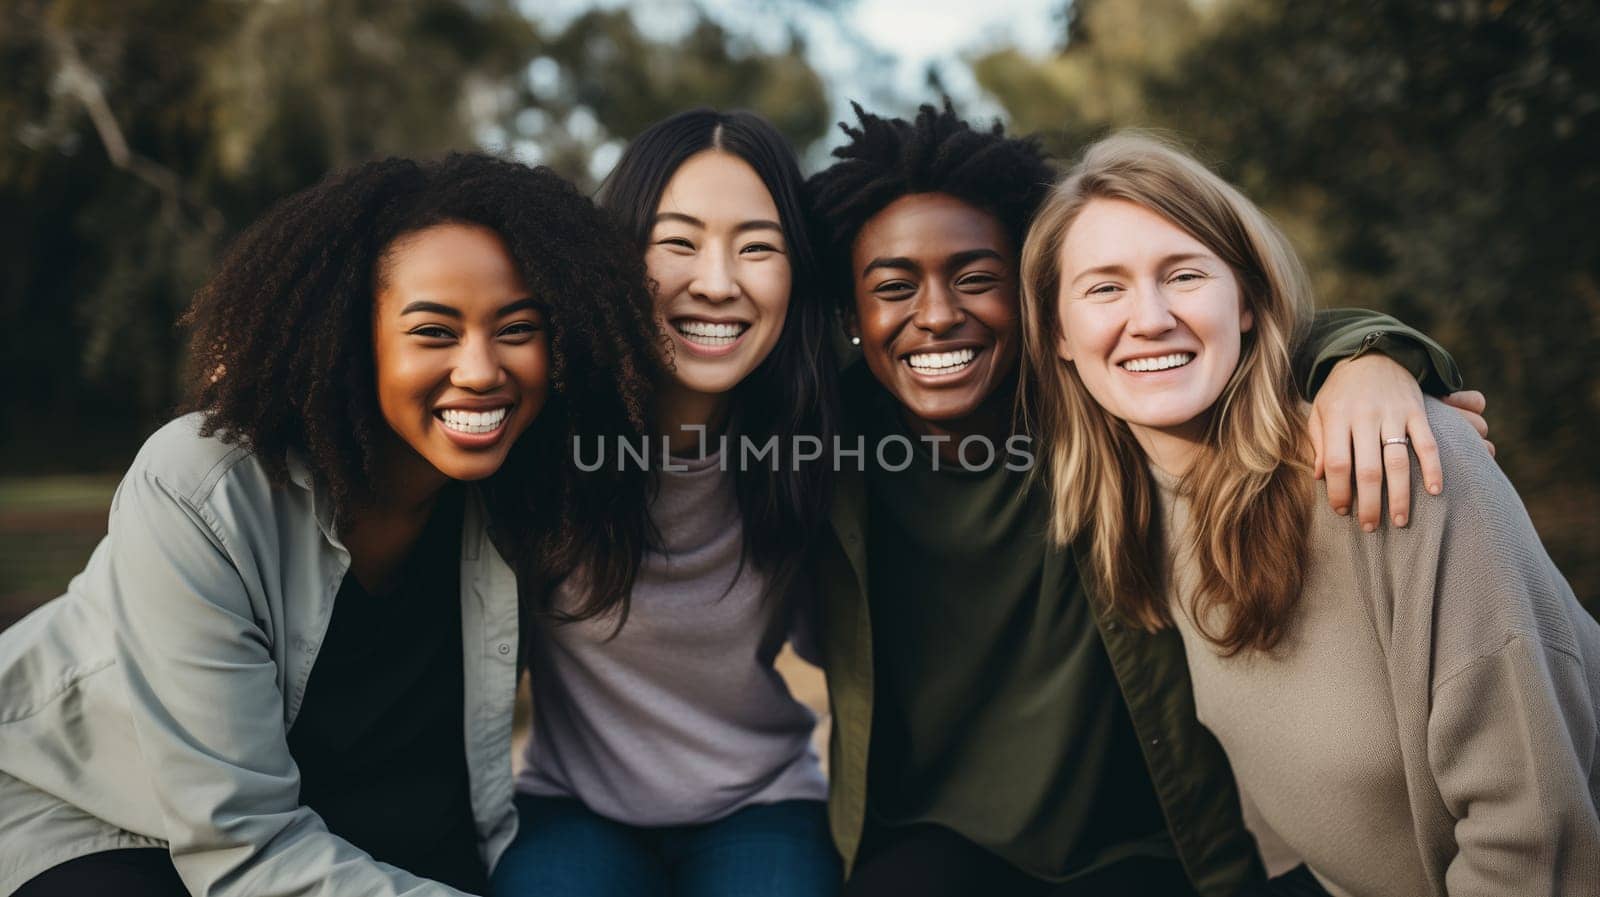 Friendly portrait of happy smiling diverse modern young people friends together, girlfriends women looking at camera on city street